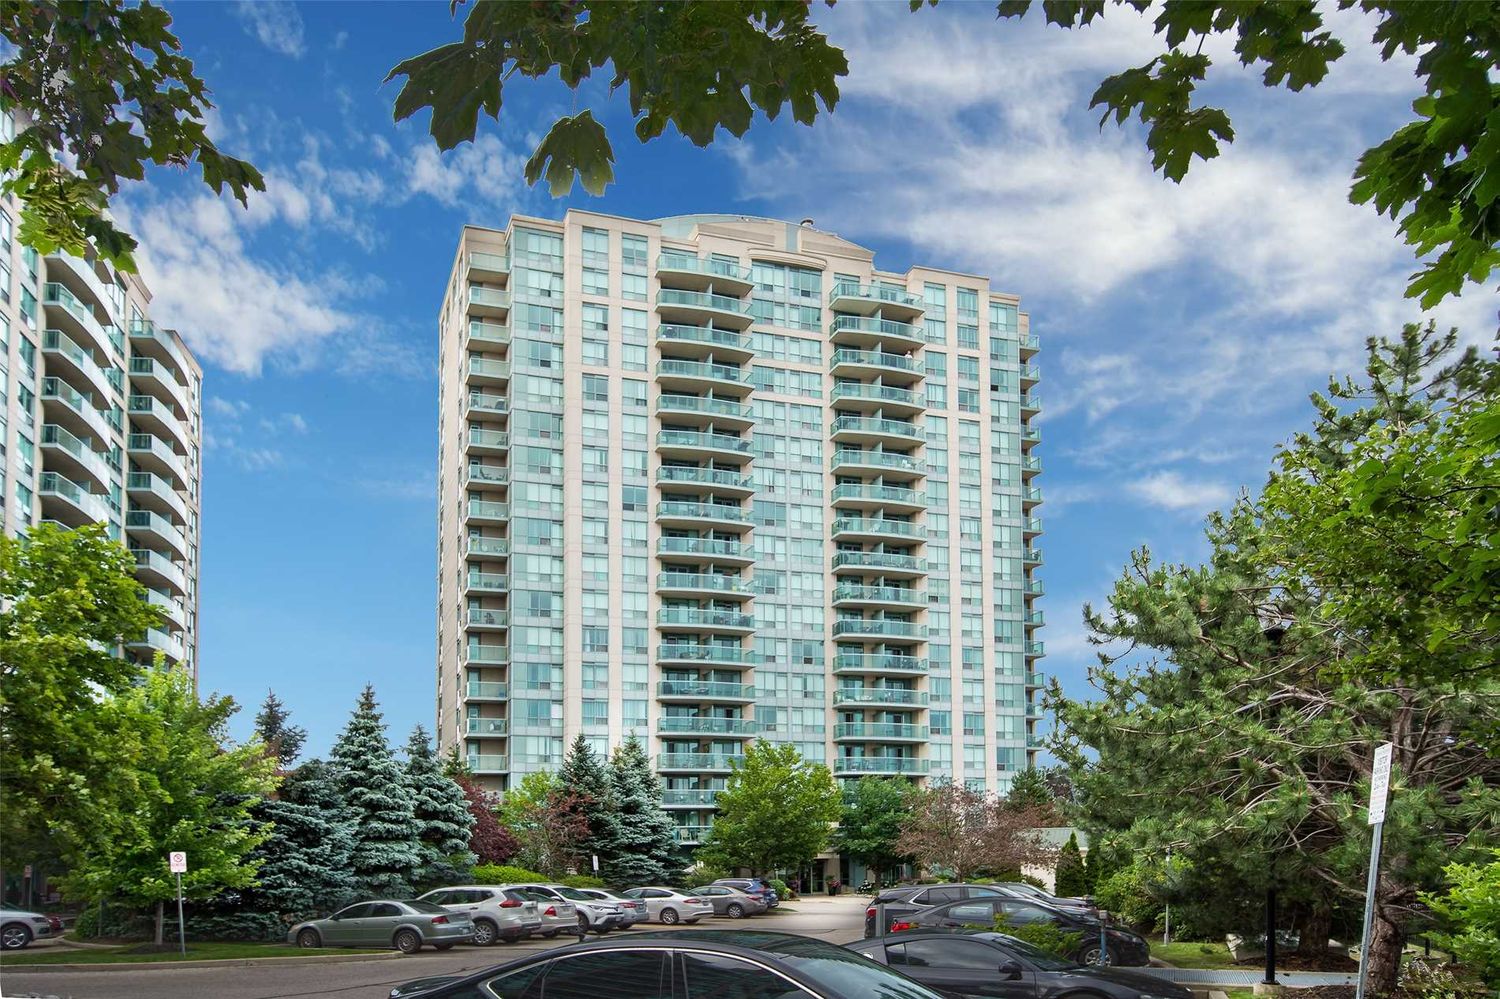 2545 Erin Centre Boulevard. Parkway Place III Condos is located in  Mississauga, Toronto - image #1 of 2